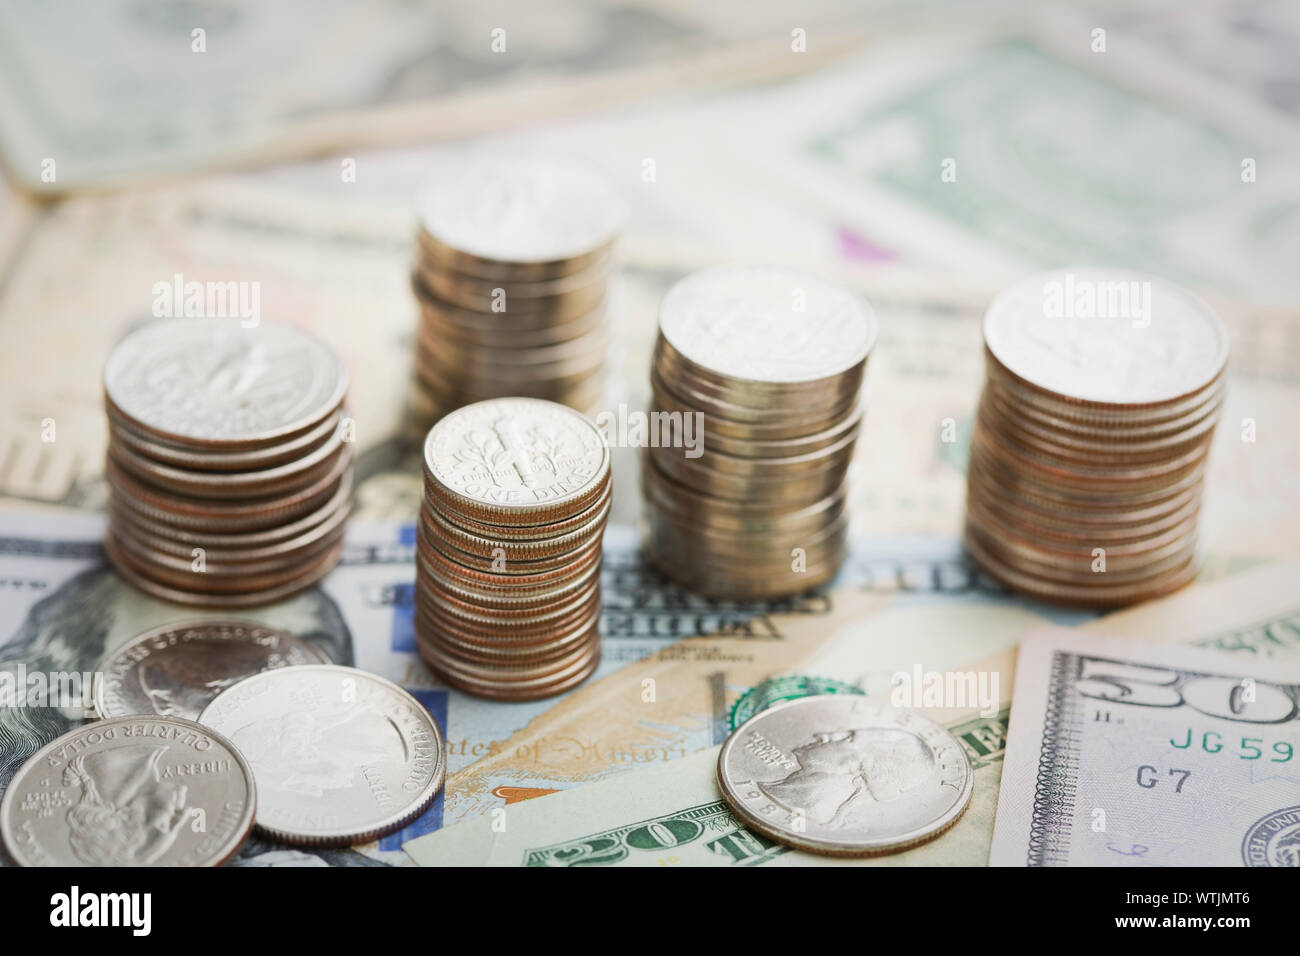 Close up of US coins and paper currency Stock Photo